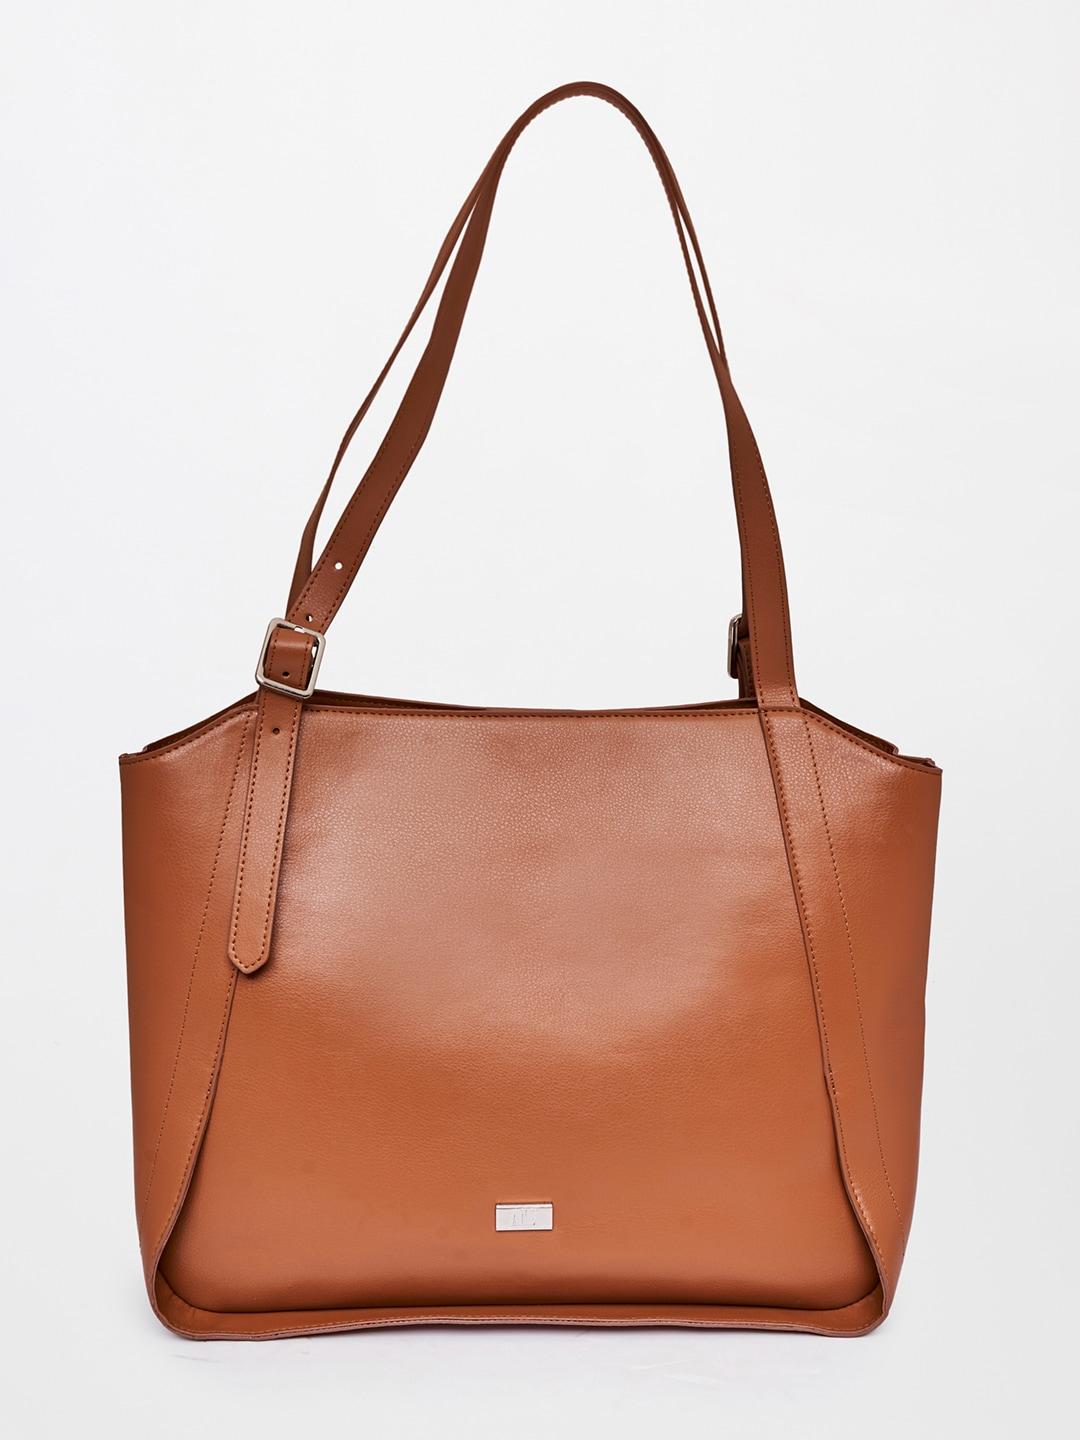 AND Women Tan PU Oversized Swagger Shoulder Bag